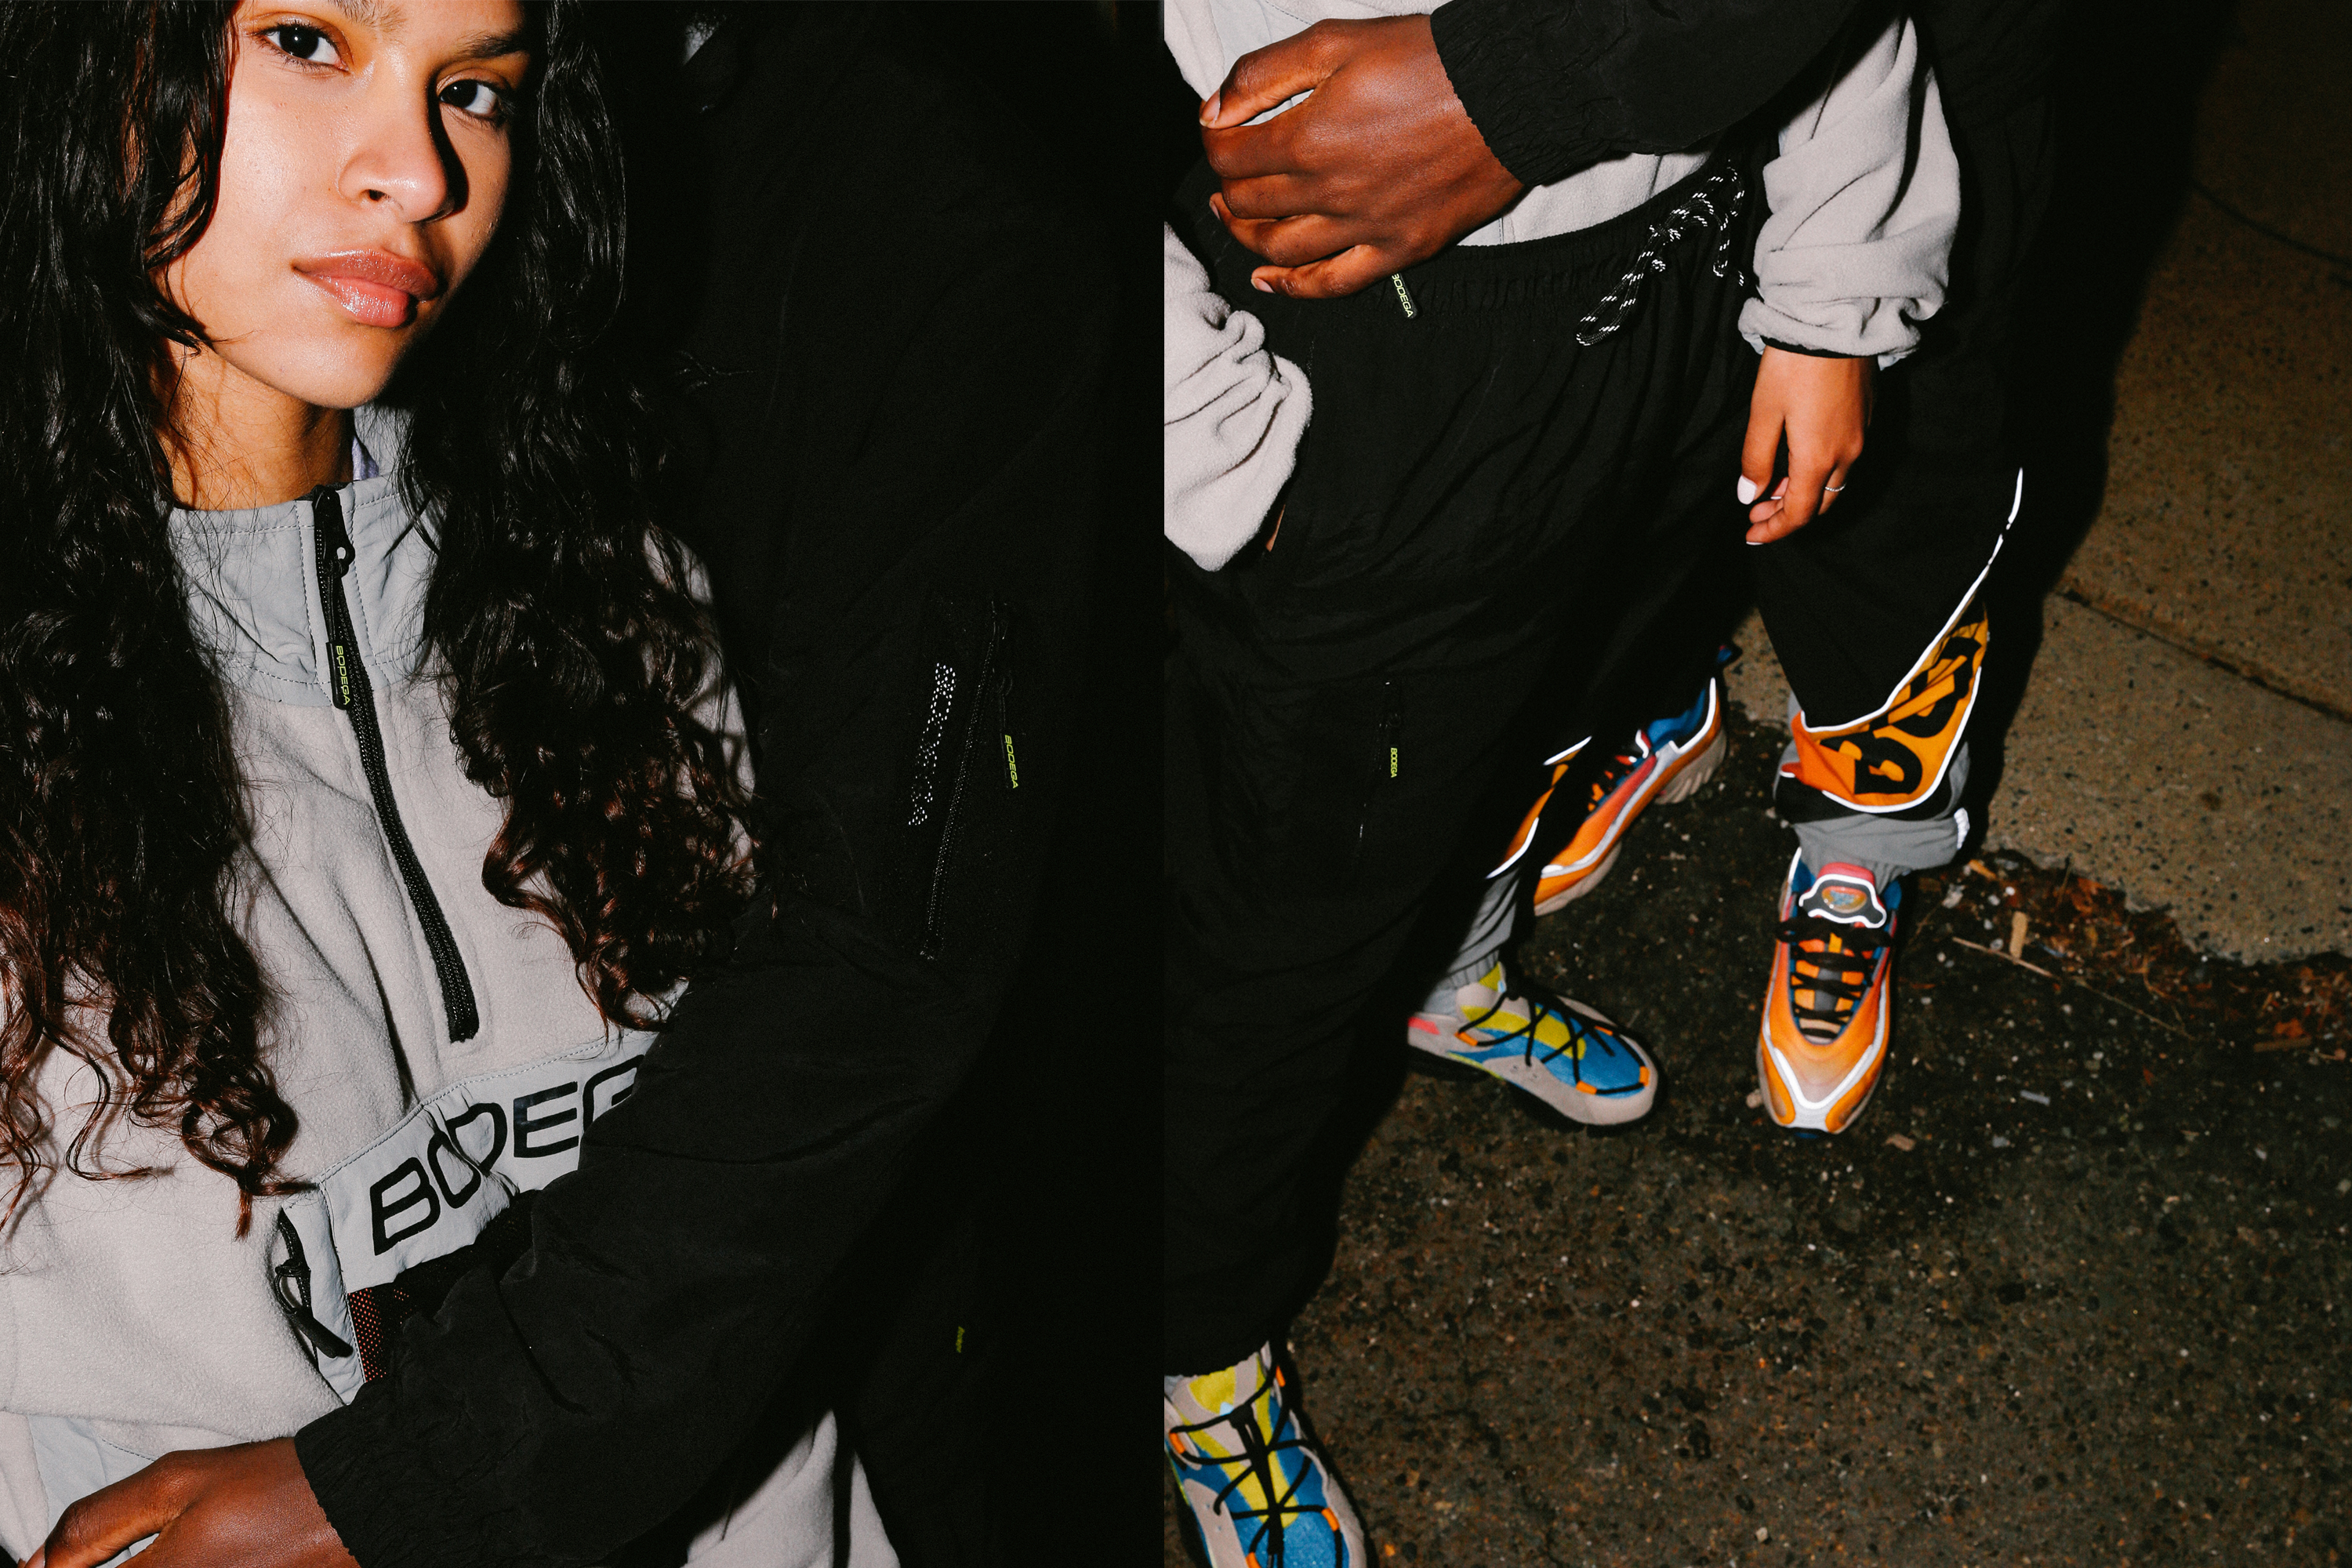 bodega reebok innersect collaboration collaborations collabs pleasures